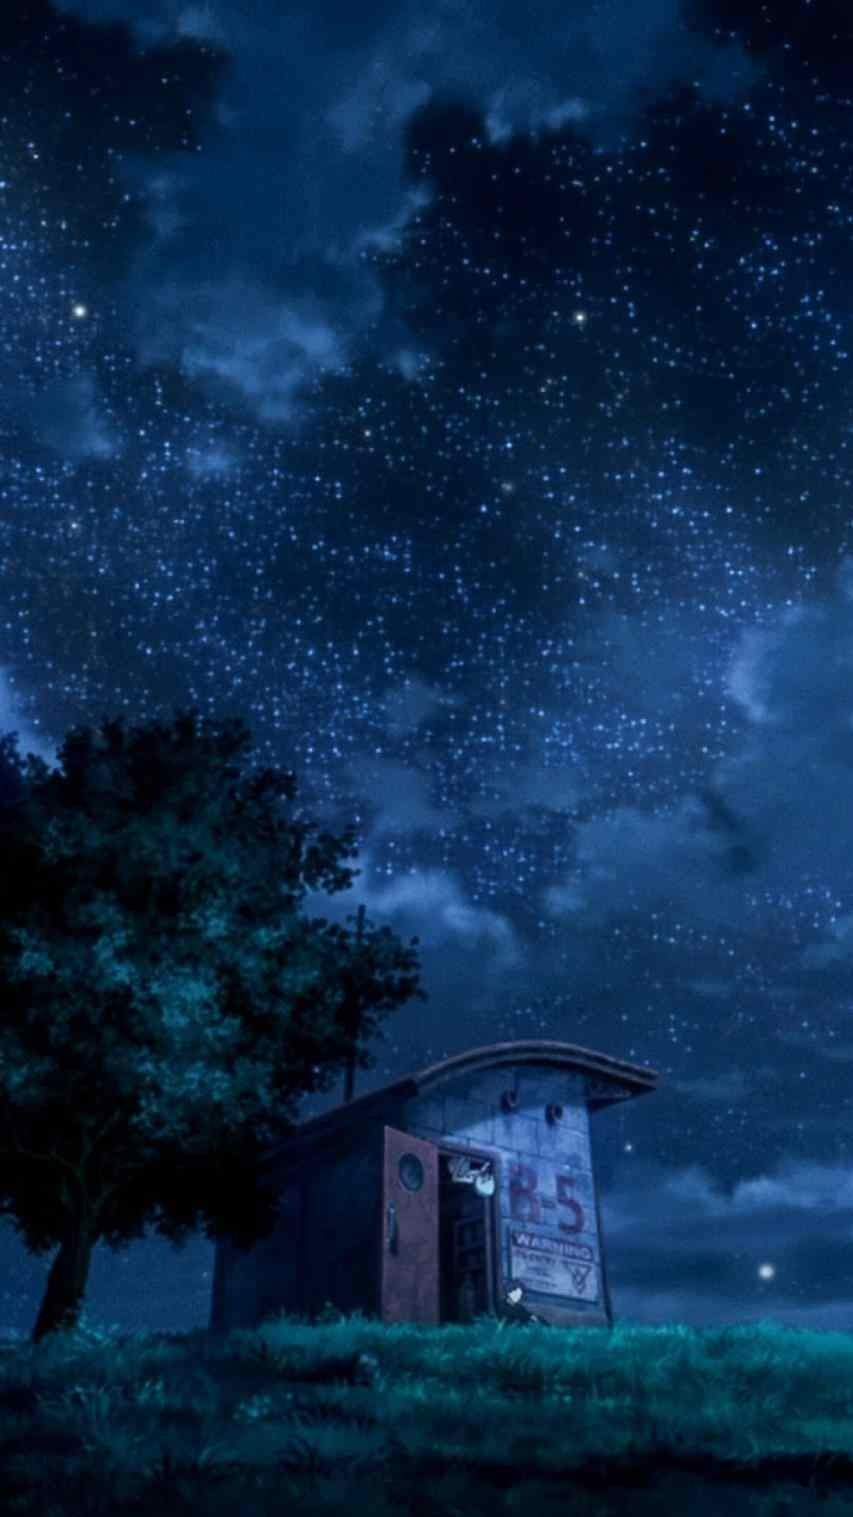 dark Anime Scenery Wallpaper Iphone Inspirational S High Definition With S. Anime Scenery, Anime Wallpaper Iphone, Anime Scenery Wallpaper